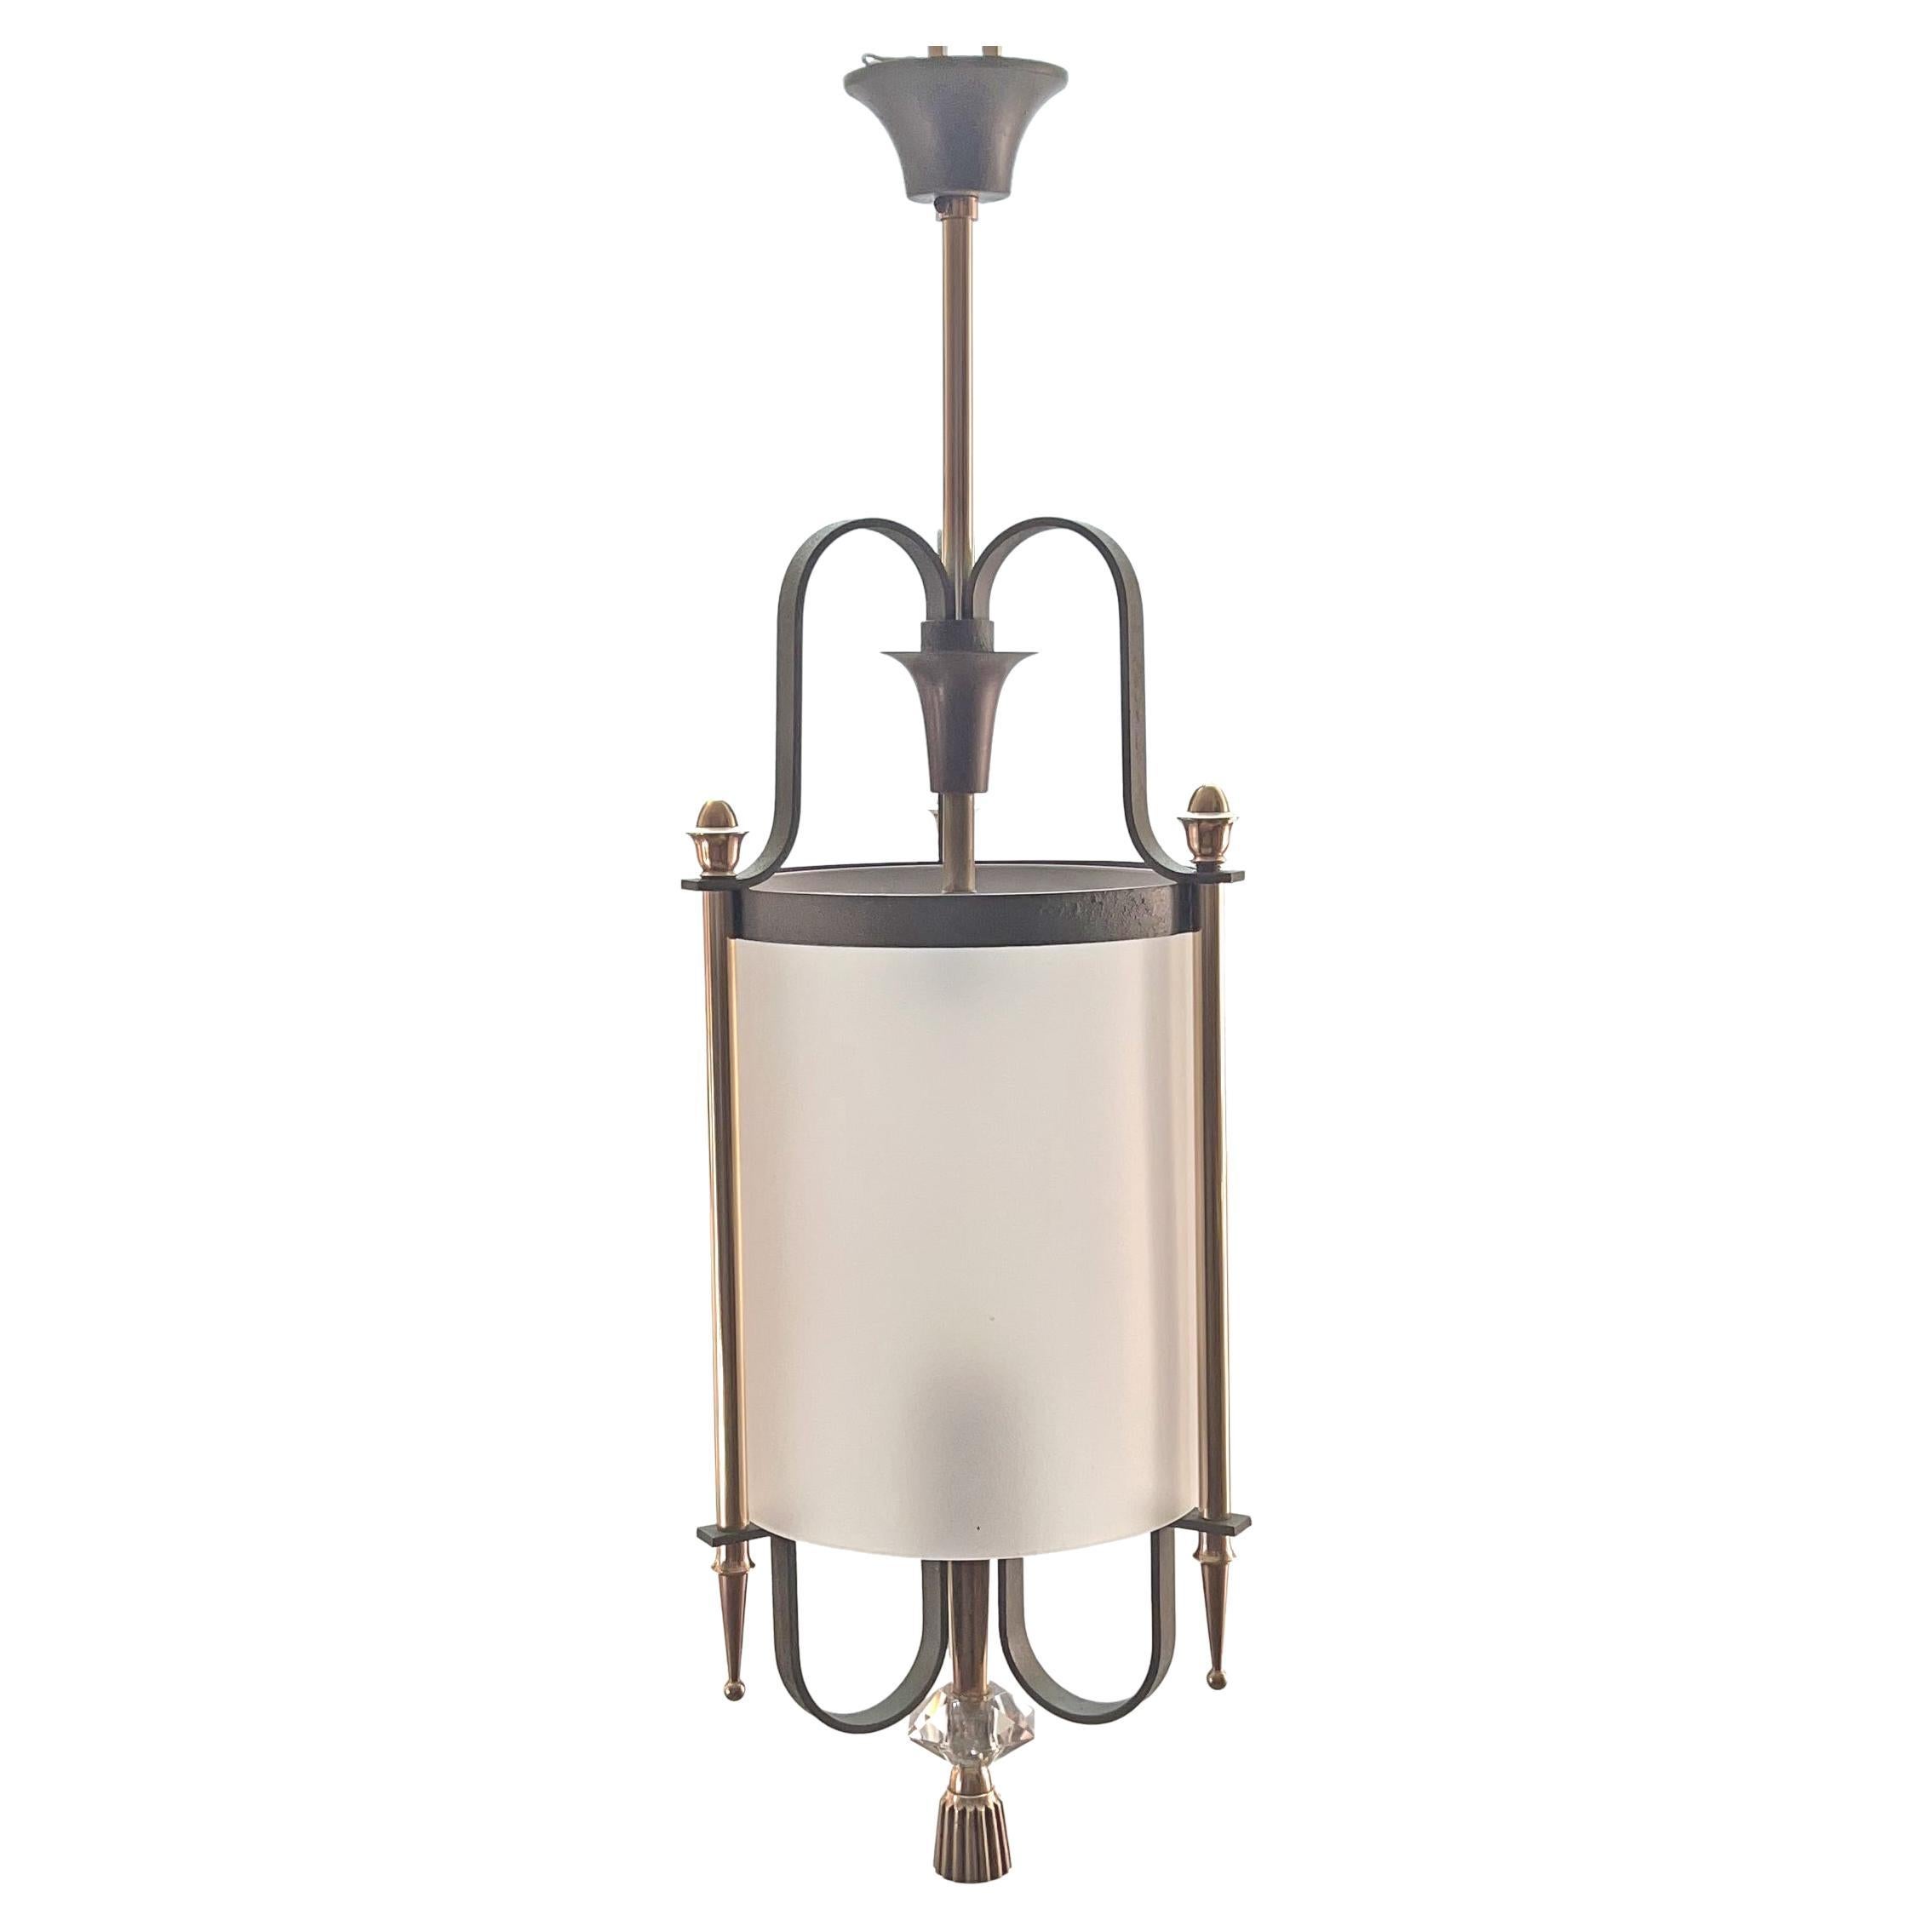 Lantern Hanging Light in Wrought Iron and Bronze, 1940s For Sale